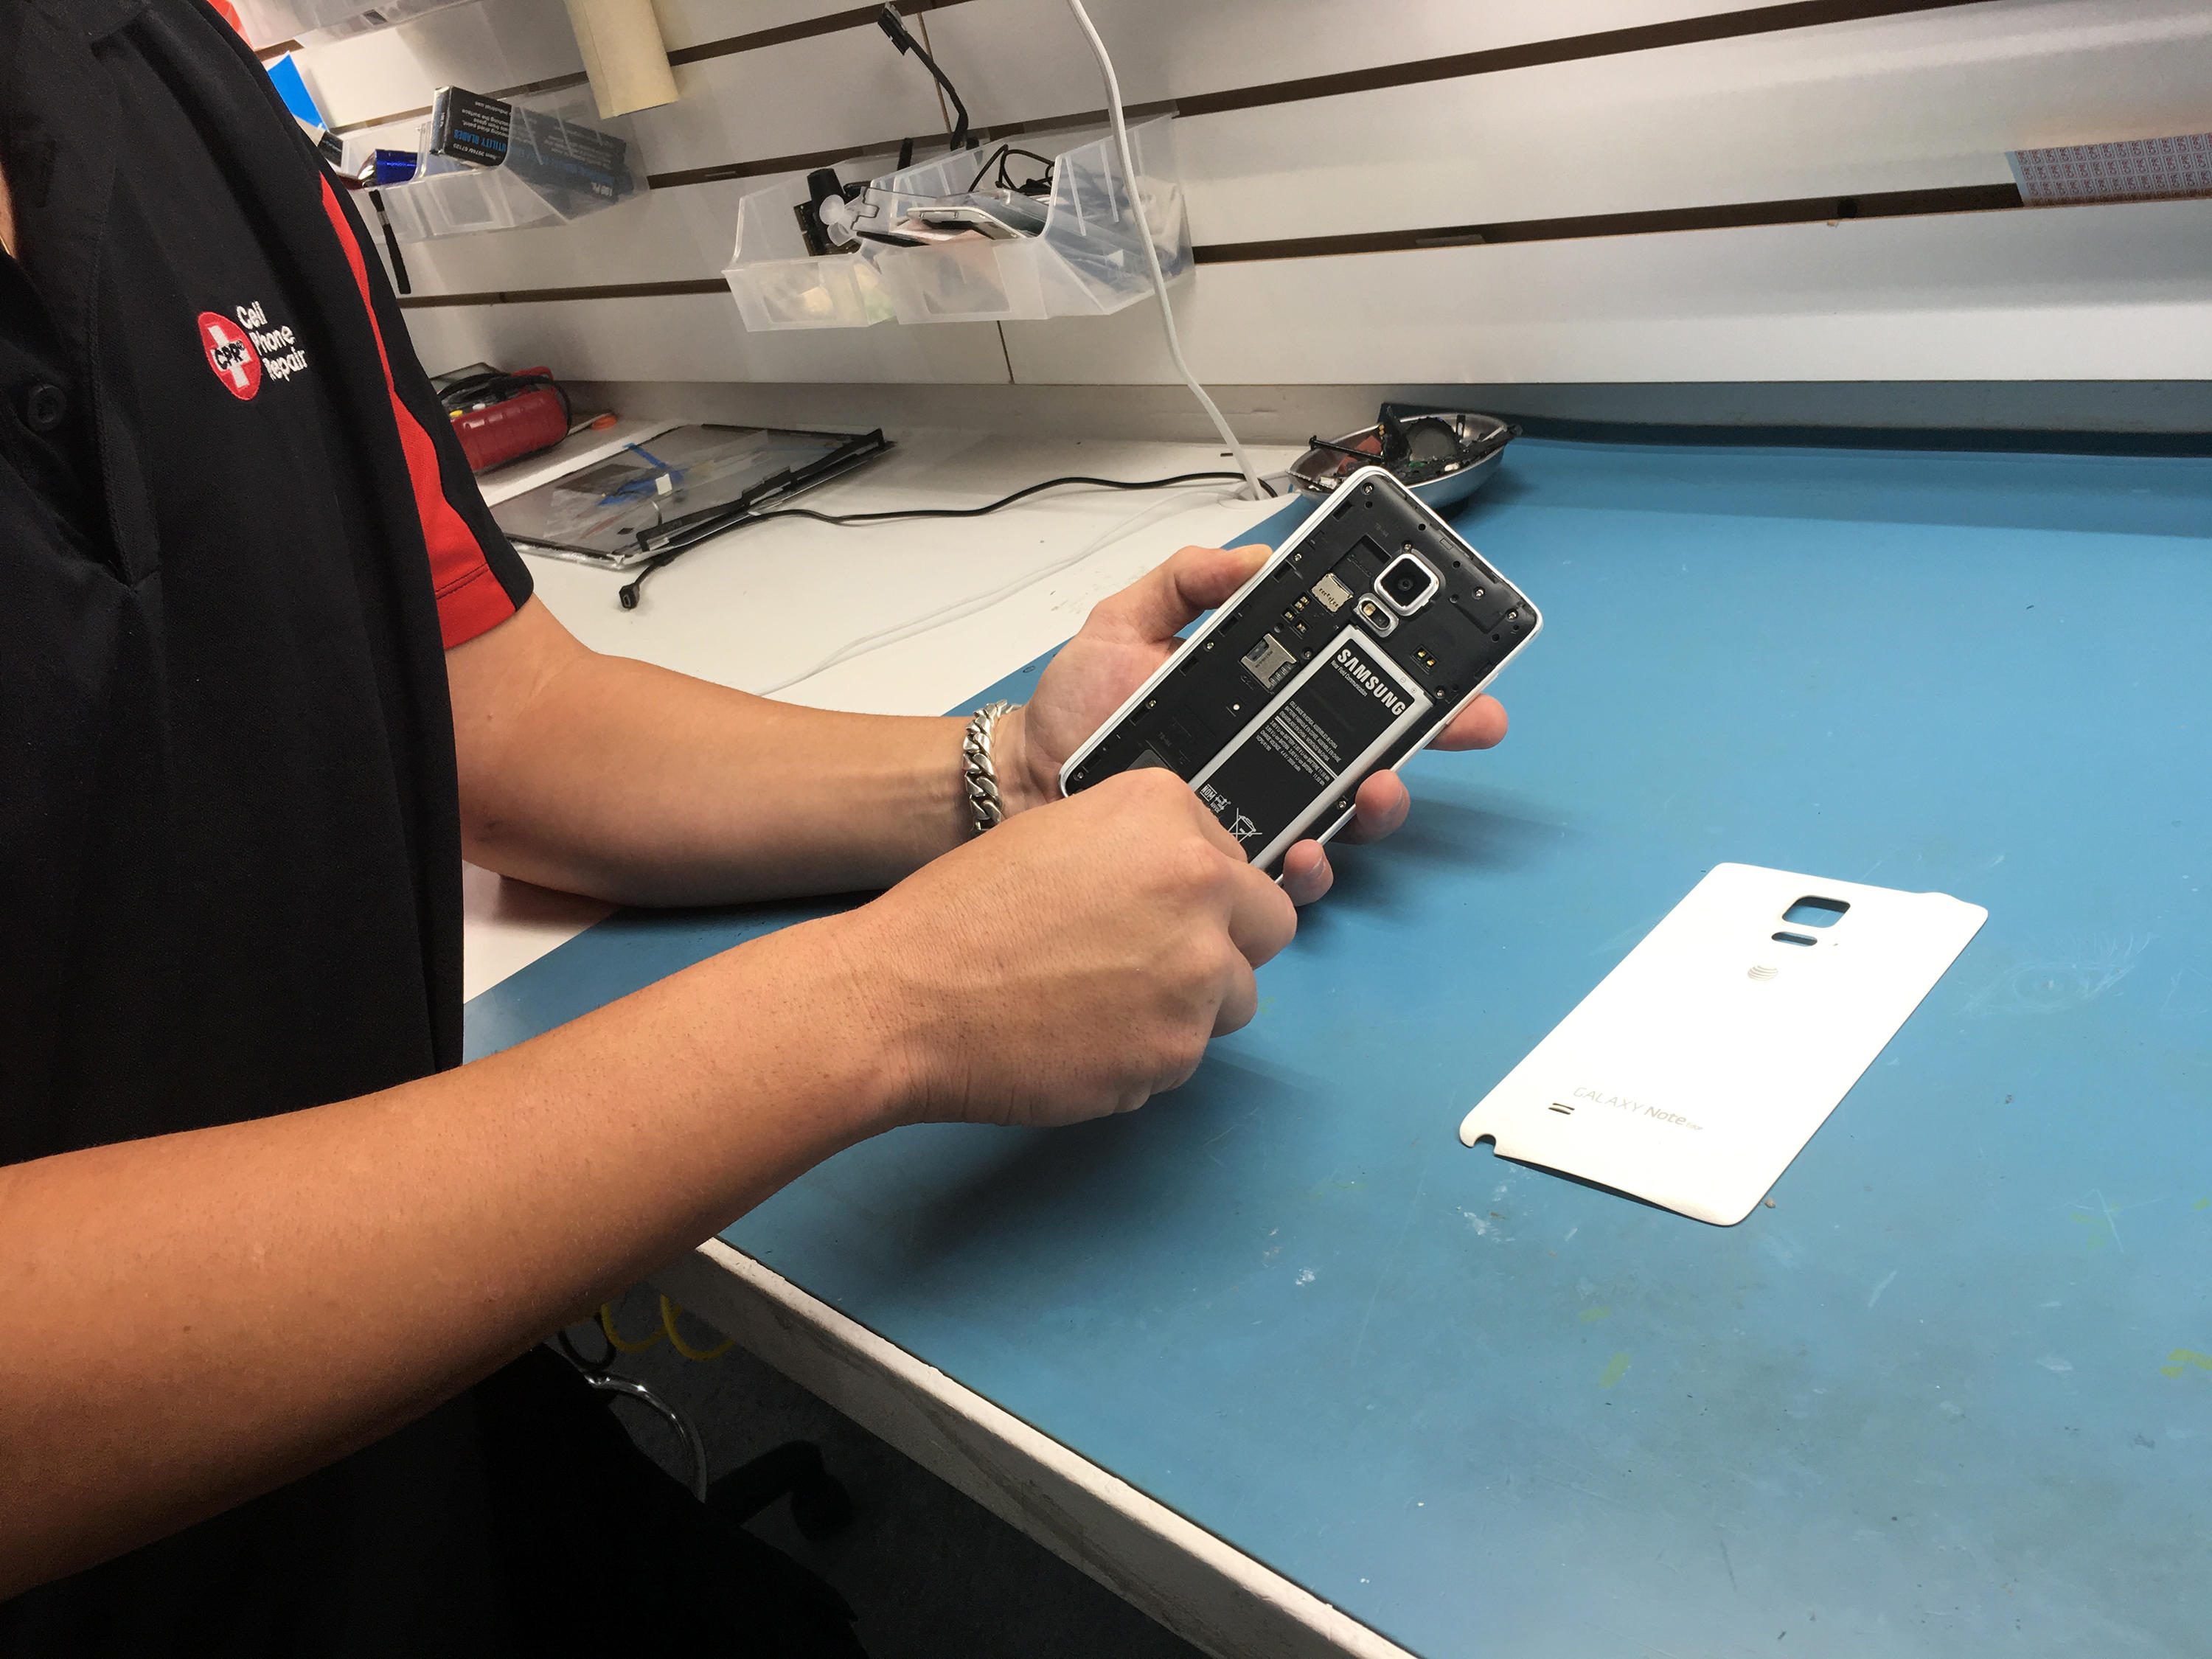 CPR Cell Phone Repair Plano Photo